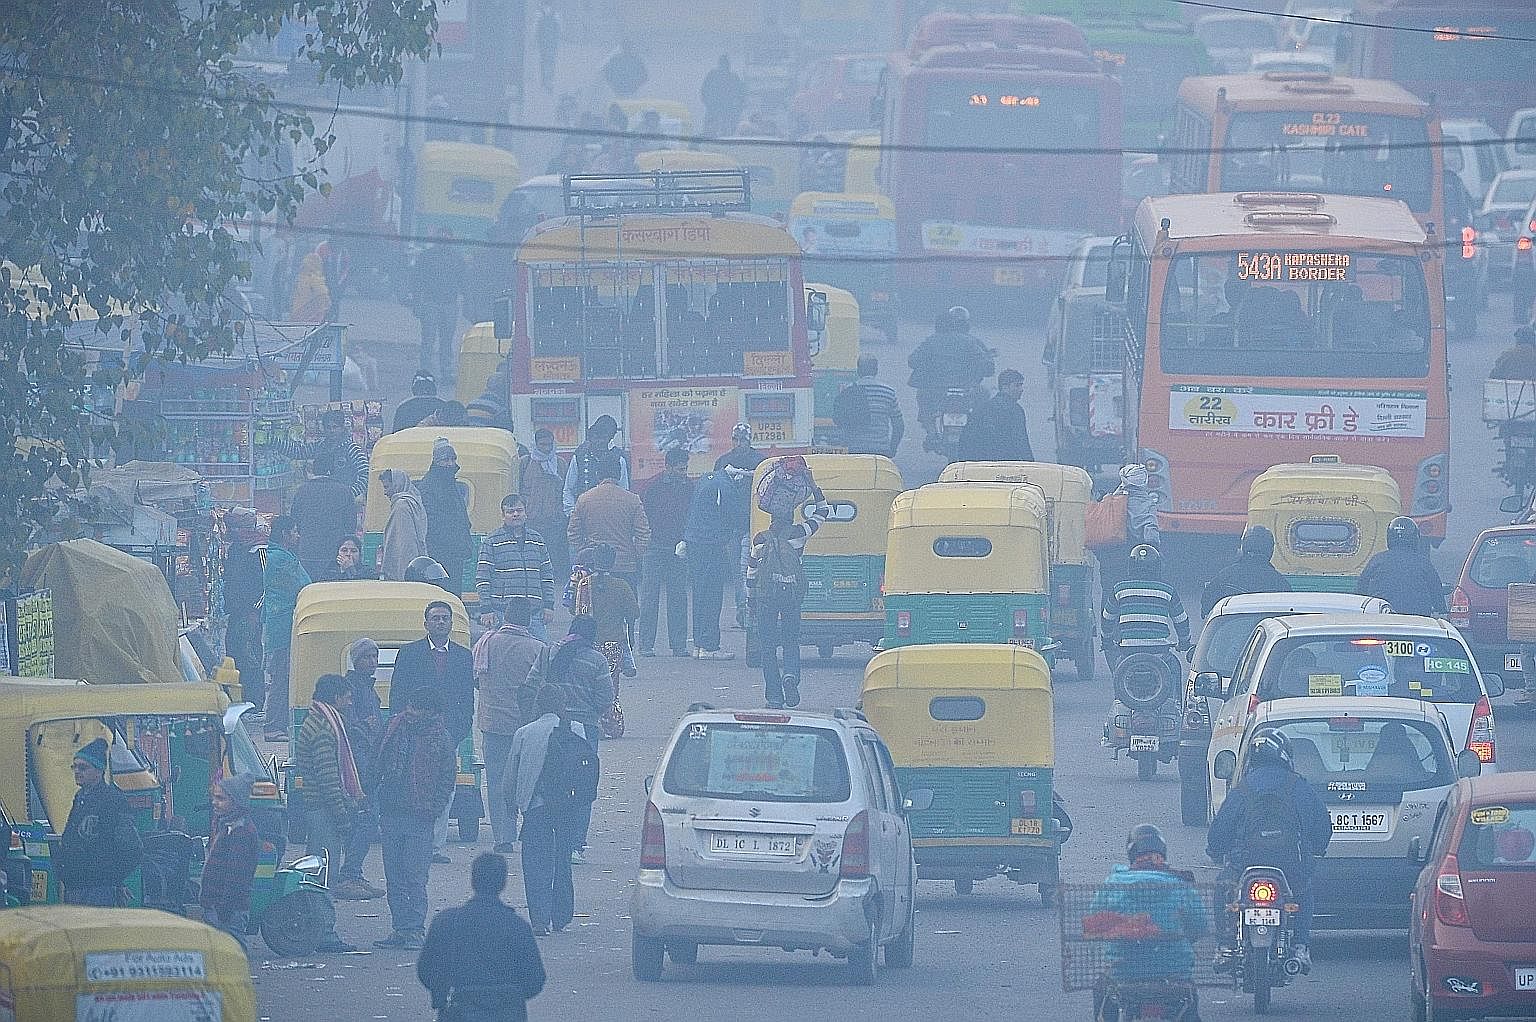 Commuters travelling on a polluted road near a bus terminus in New Delhi.